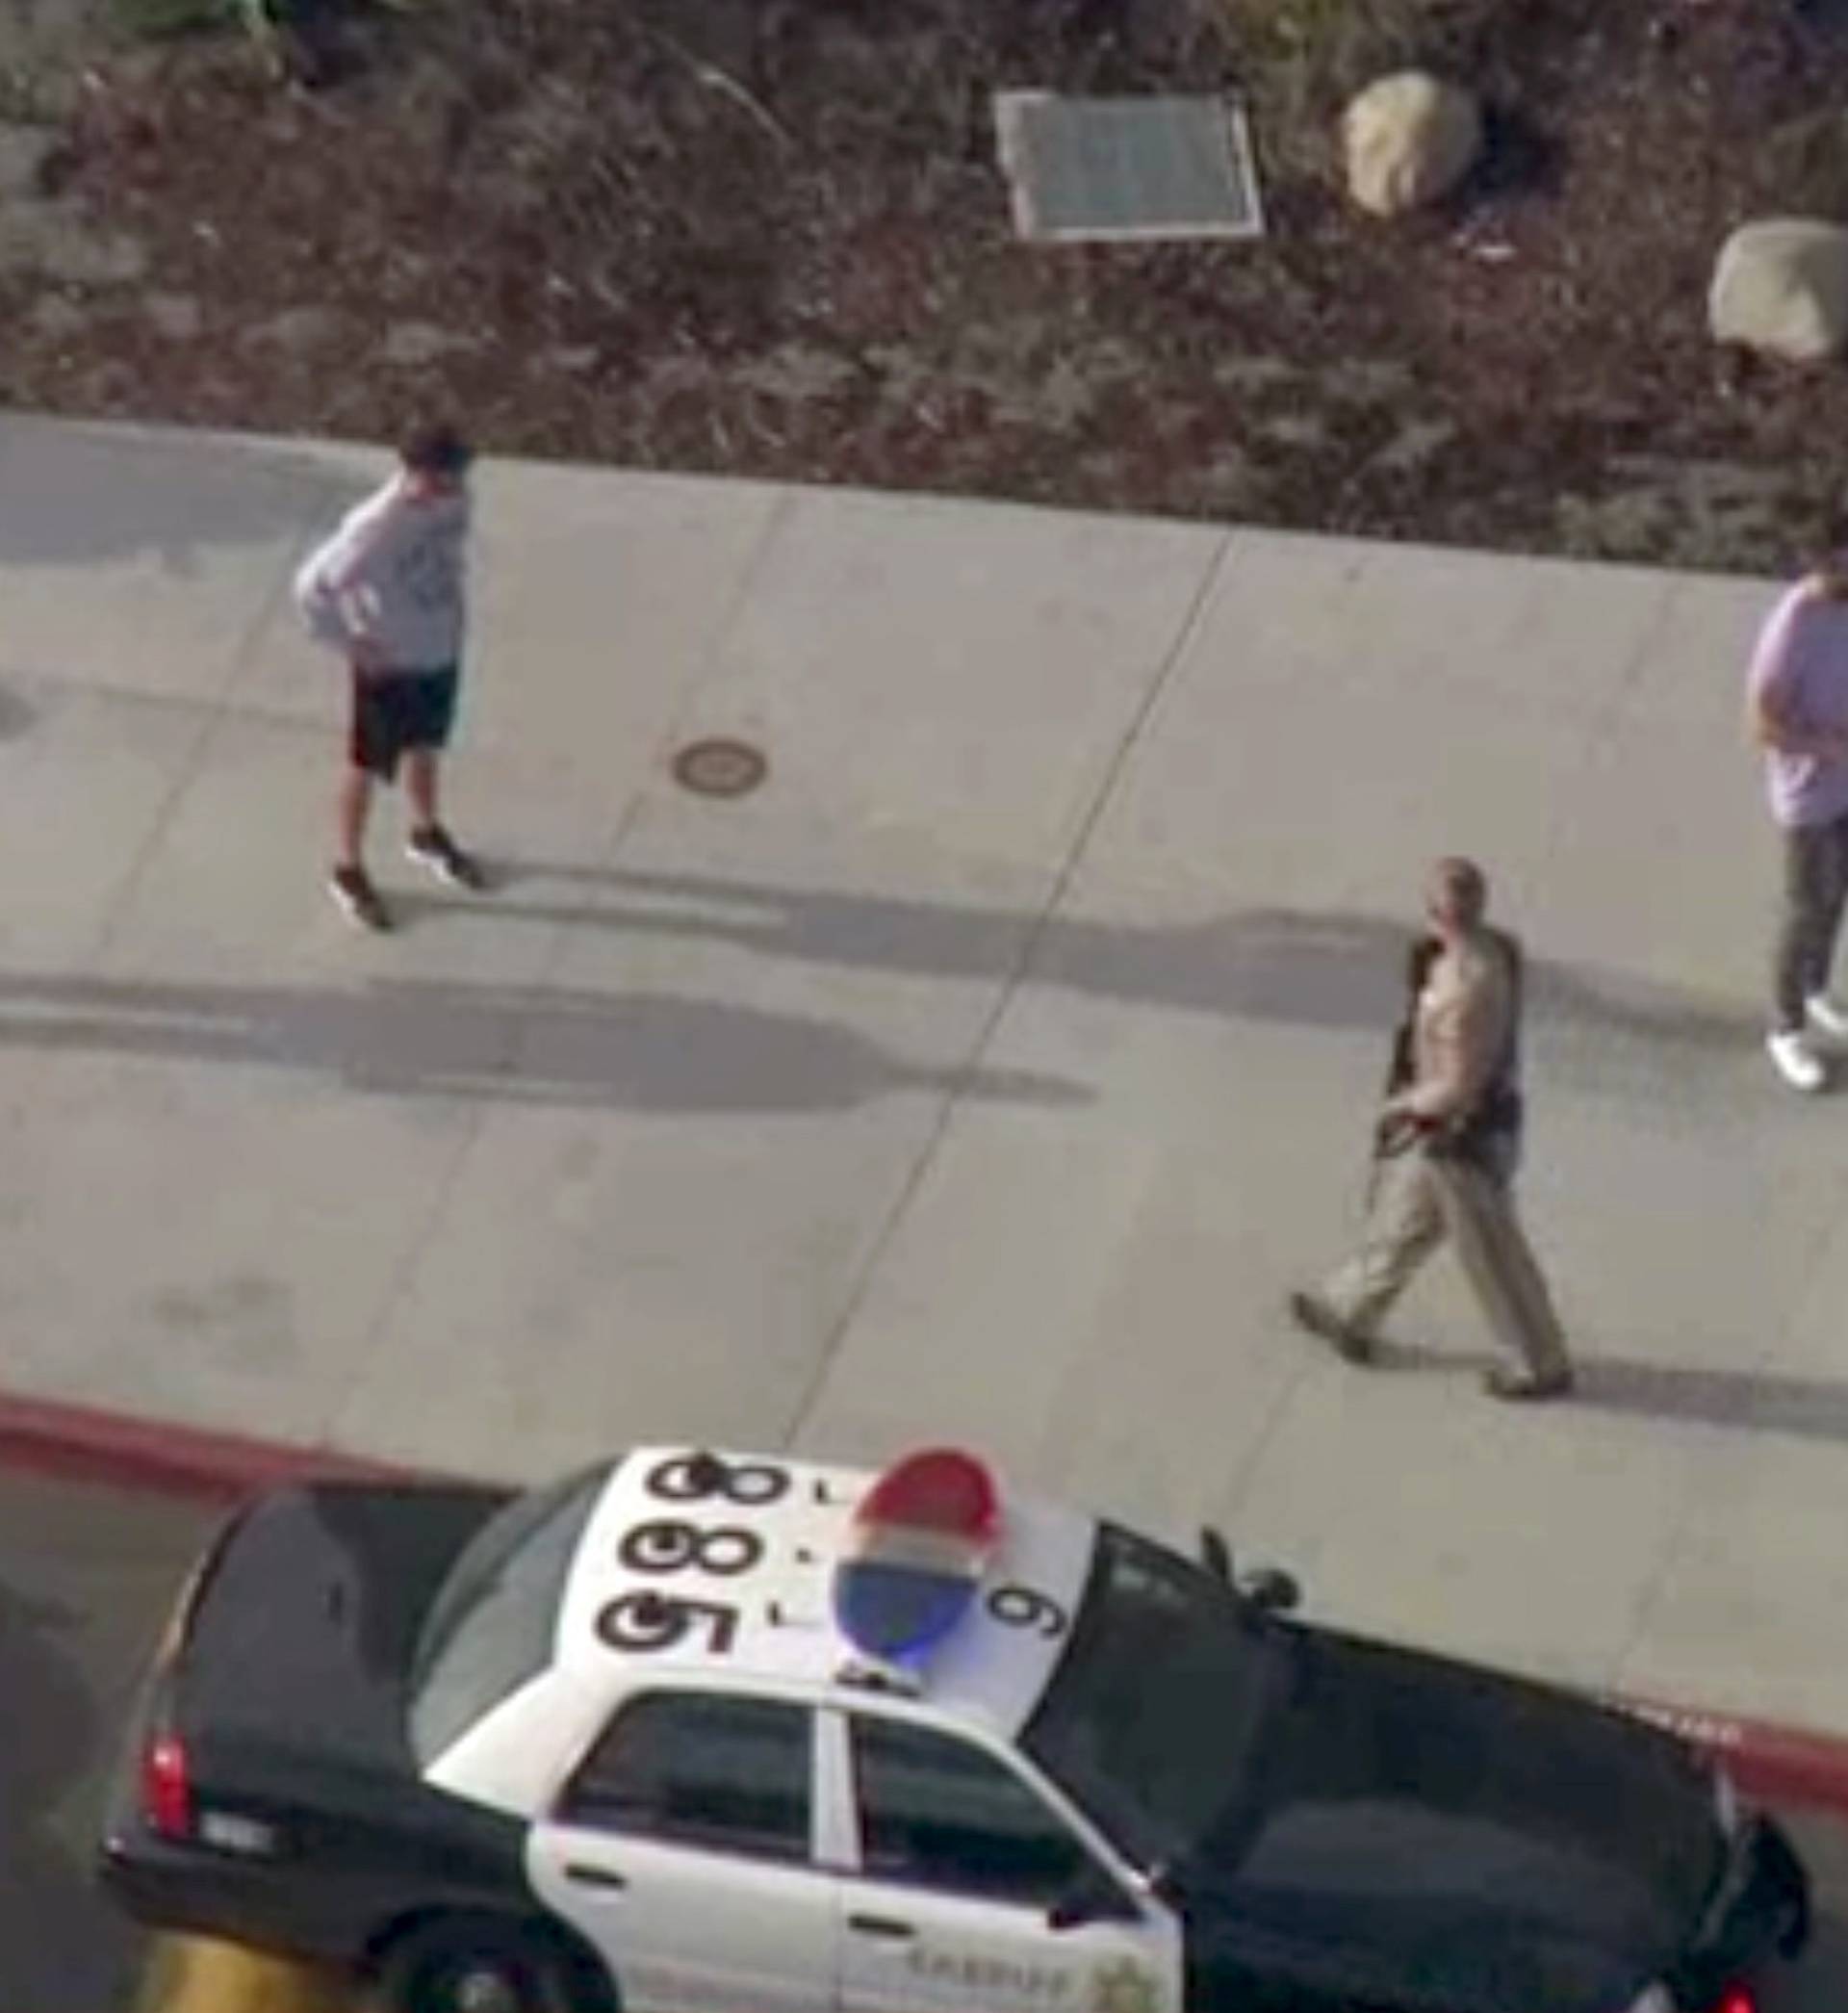 A law enforcement official leads students at the scene of a shooting at Saugus high school in Santa Clarita